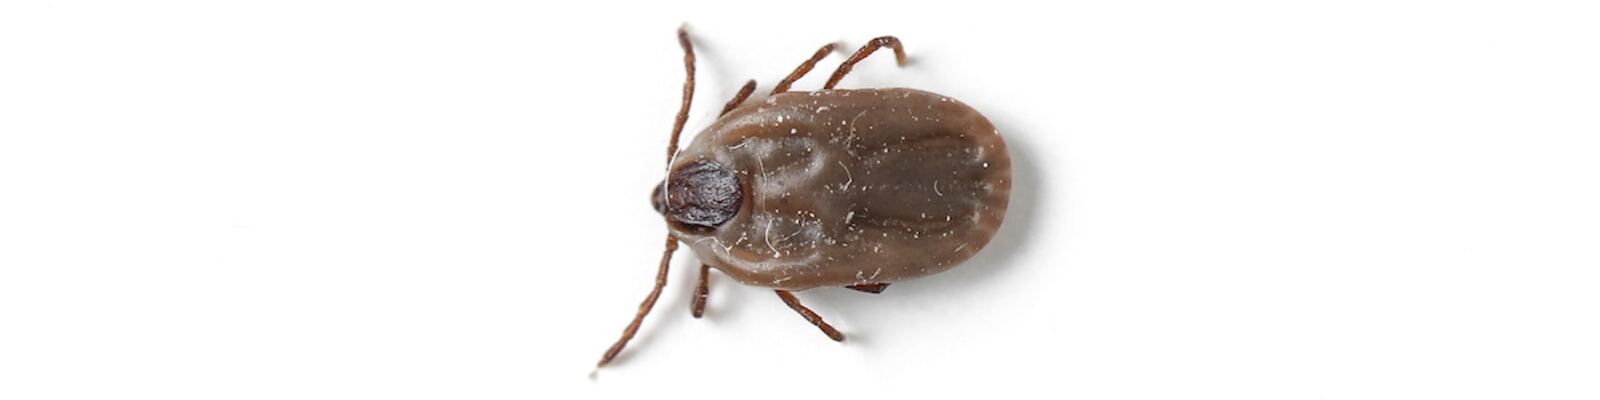 What You Should Know About the Brown Dog Tick | IGeneX | Tick Talk